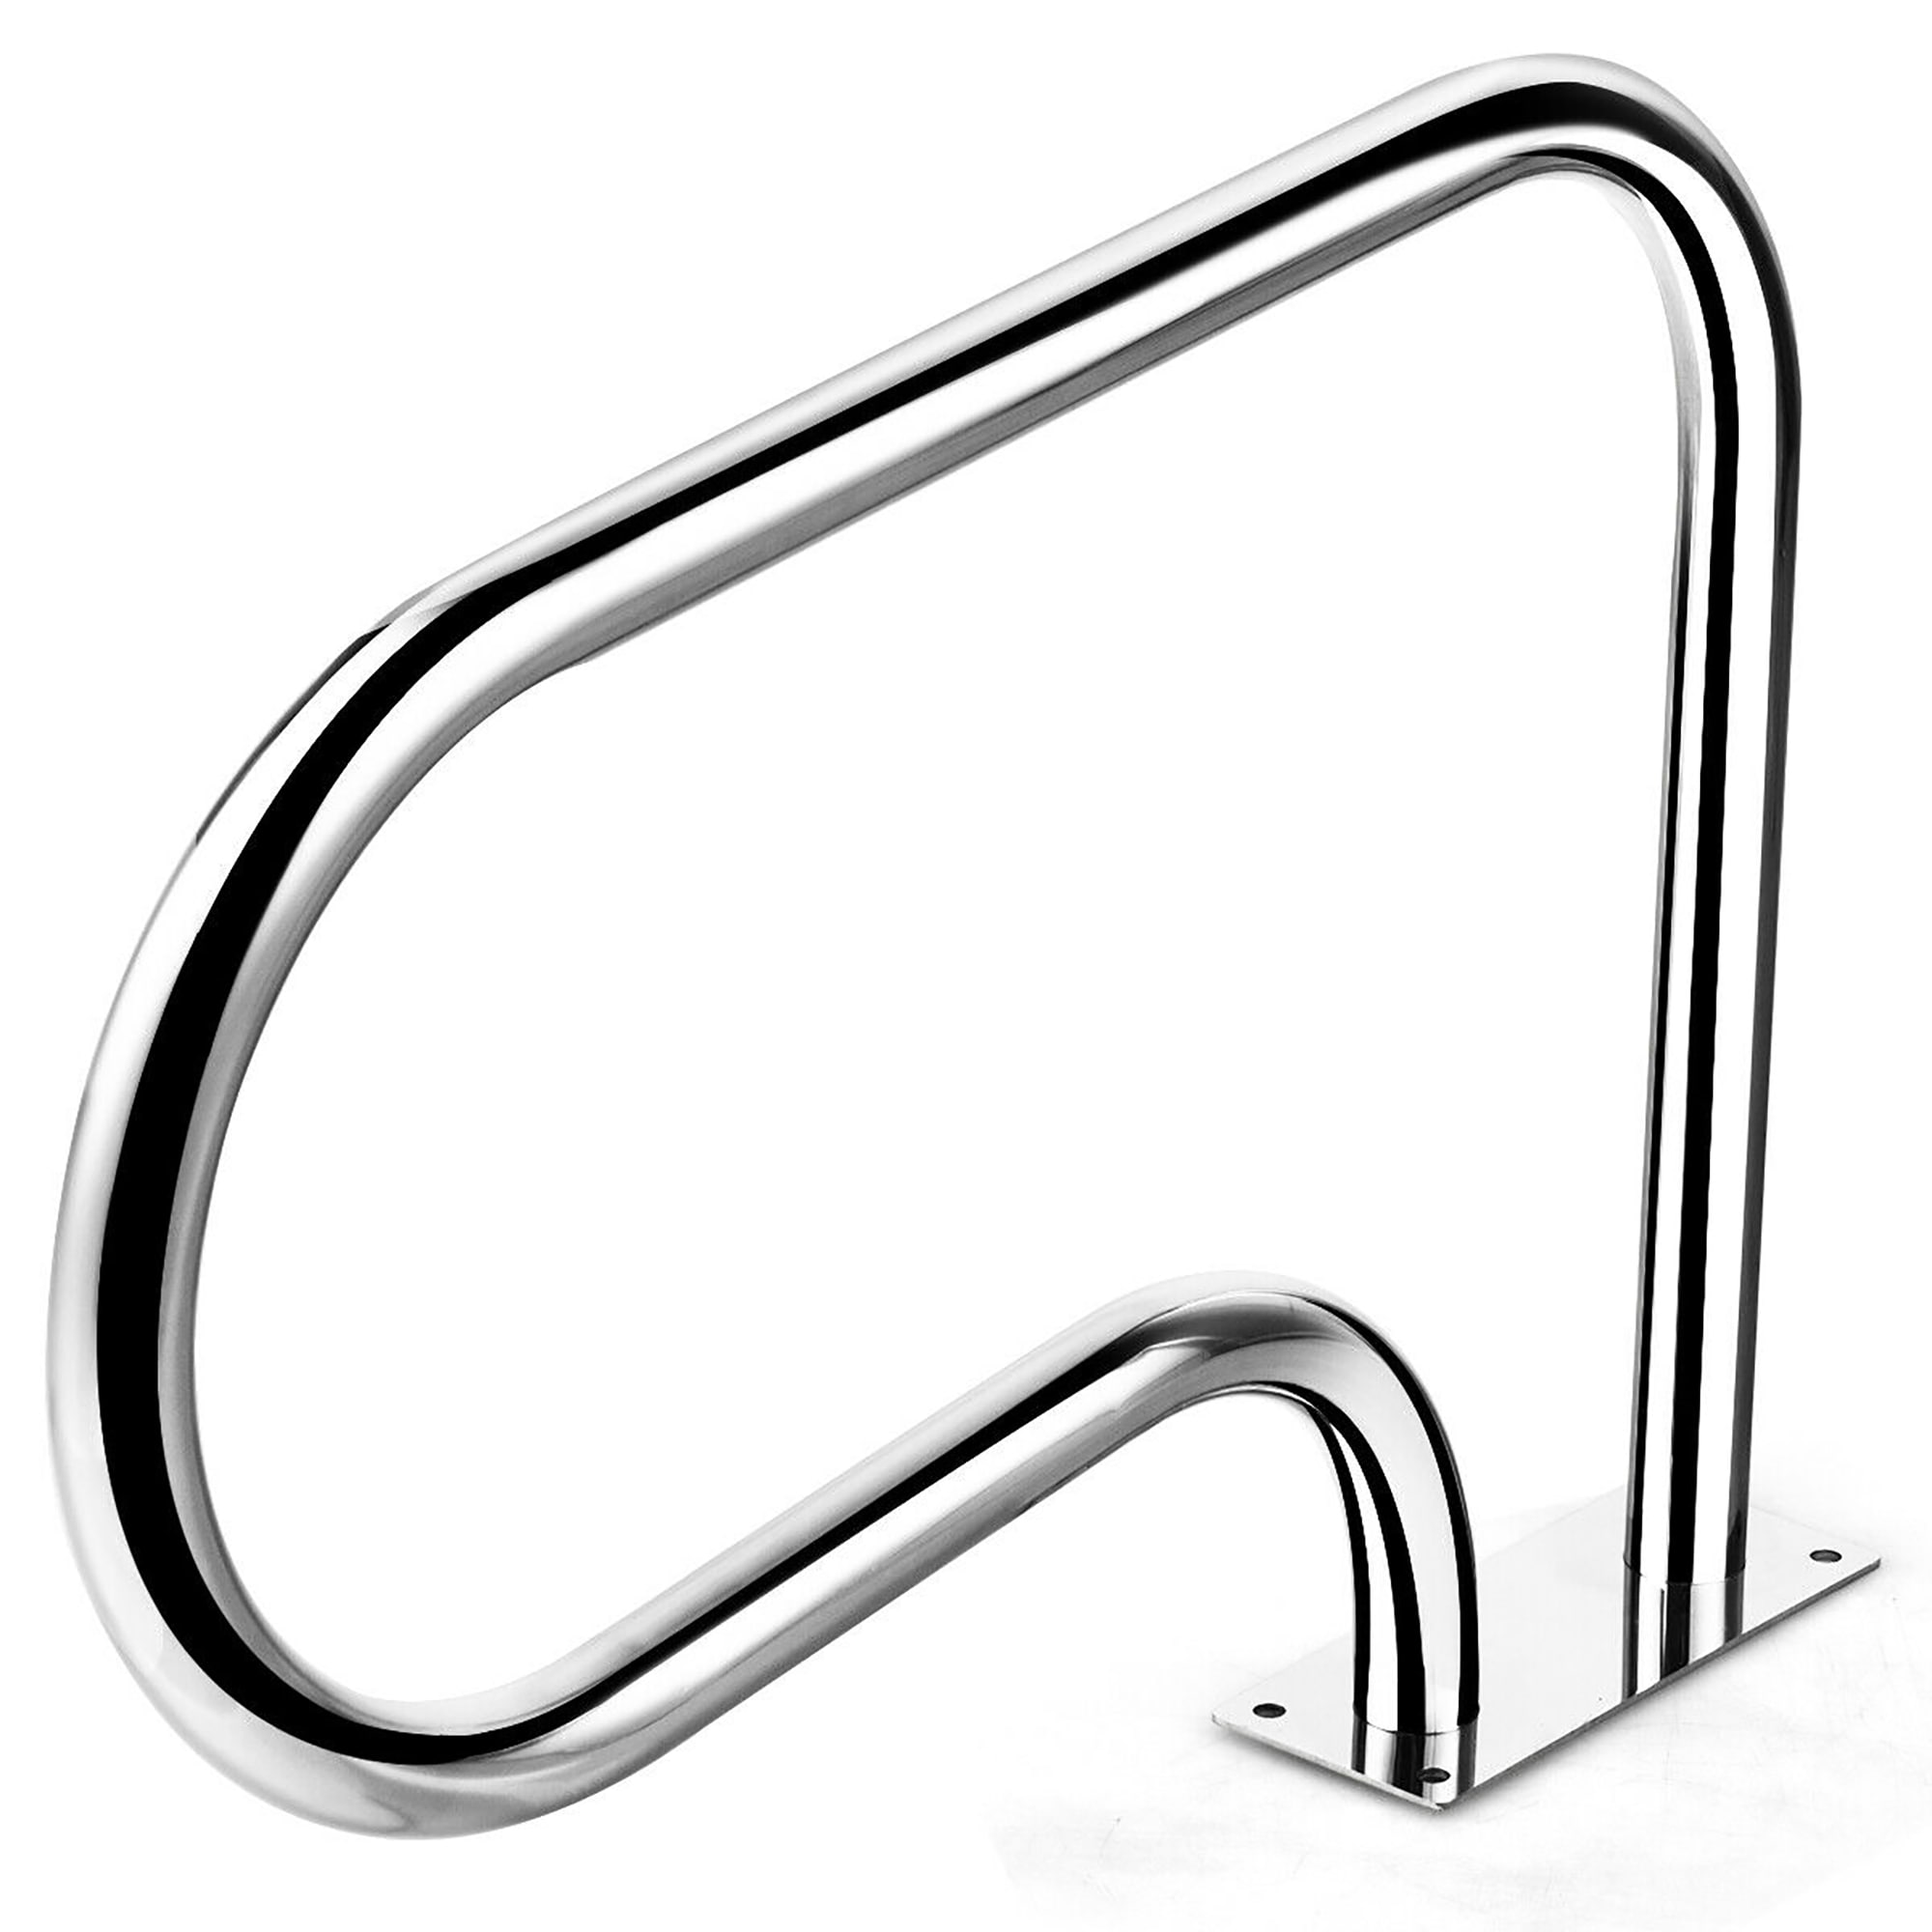 Swimming Pool Hand Rail Stainless Steel Ladder Outdoor Stair Rail w/ Base Plate 